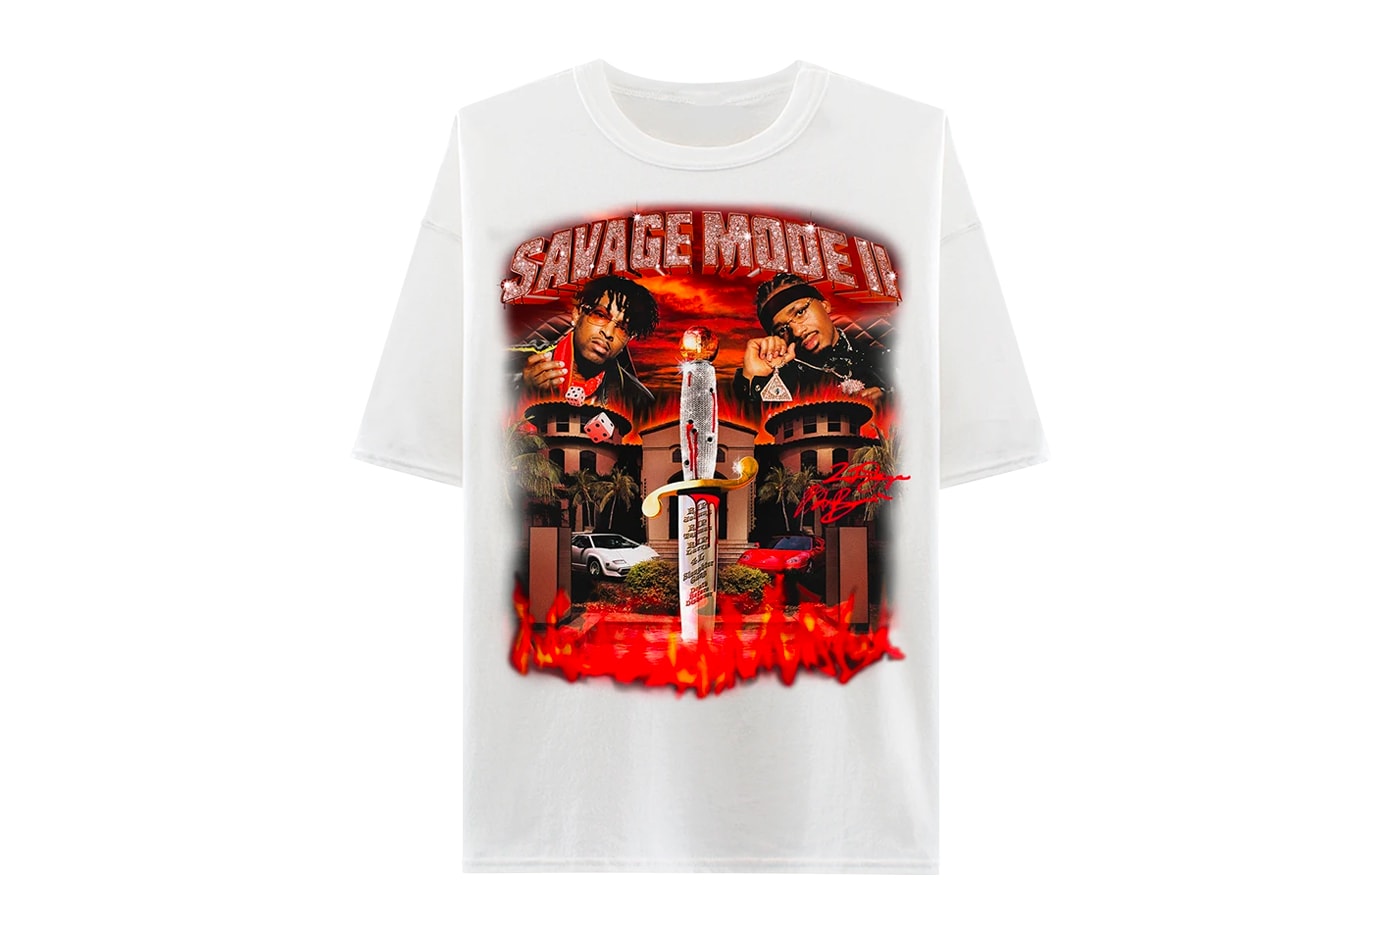 Claire rol Stadion 21 Savage x Metro Boomin 'Savage Mode 2' Merch | Hypebeast